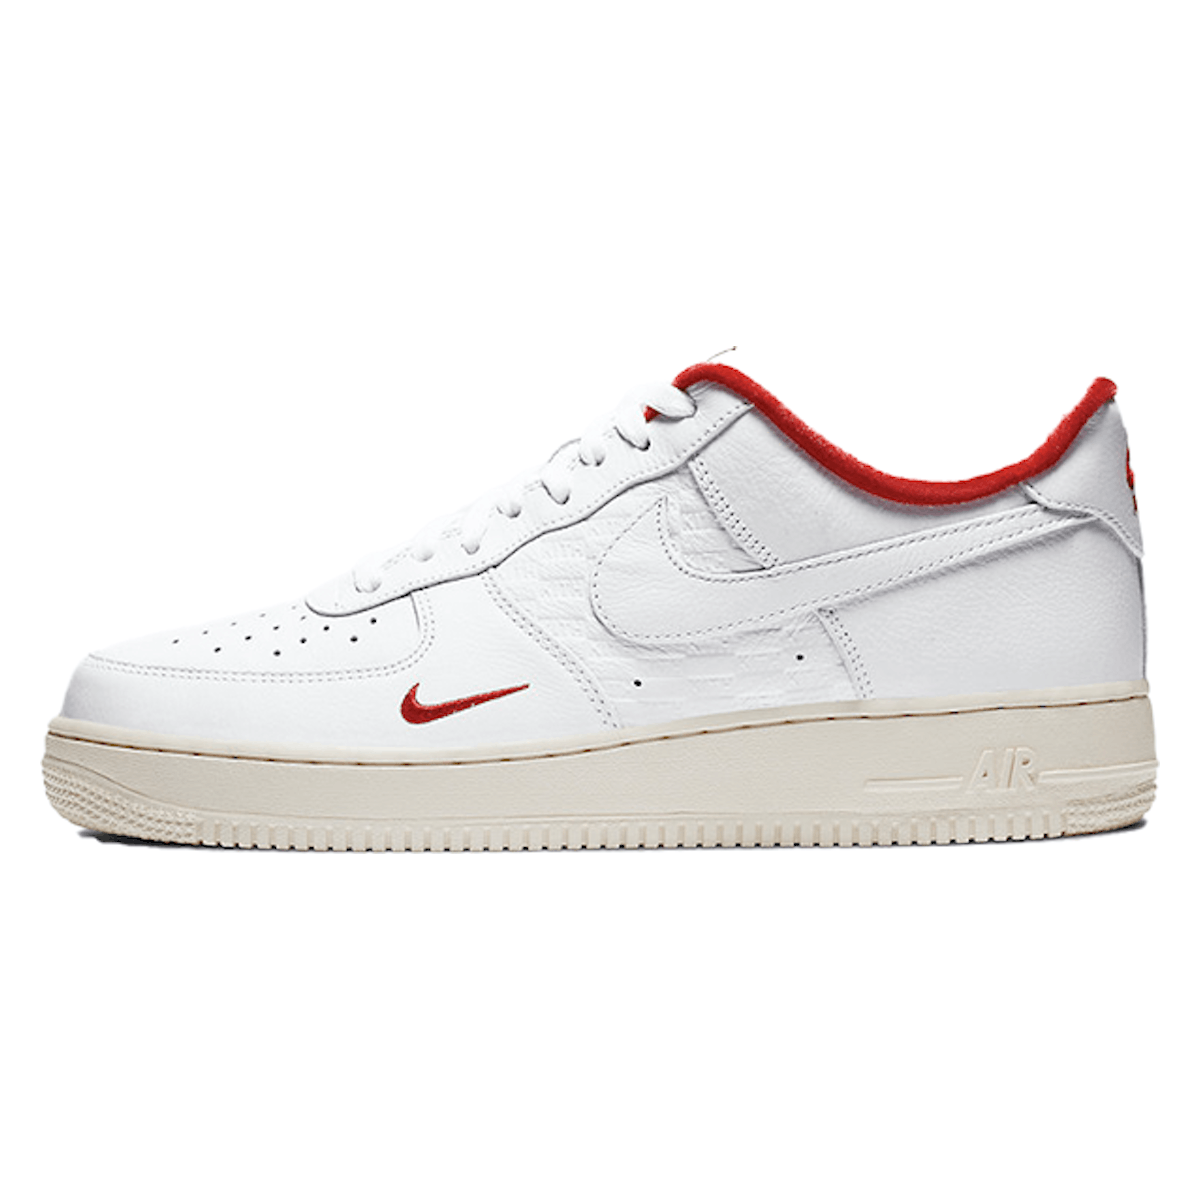 Kith x Nike Air Force 1 Low "White"